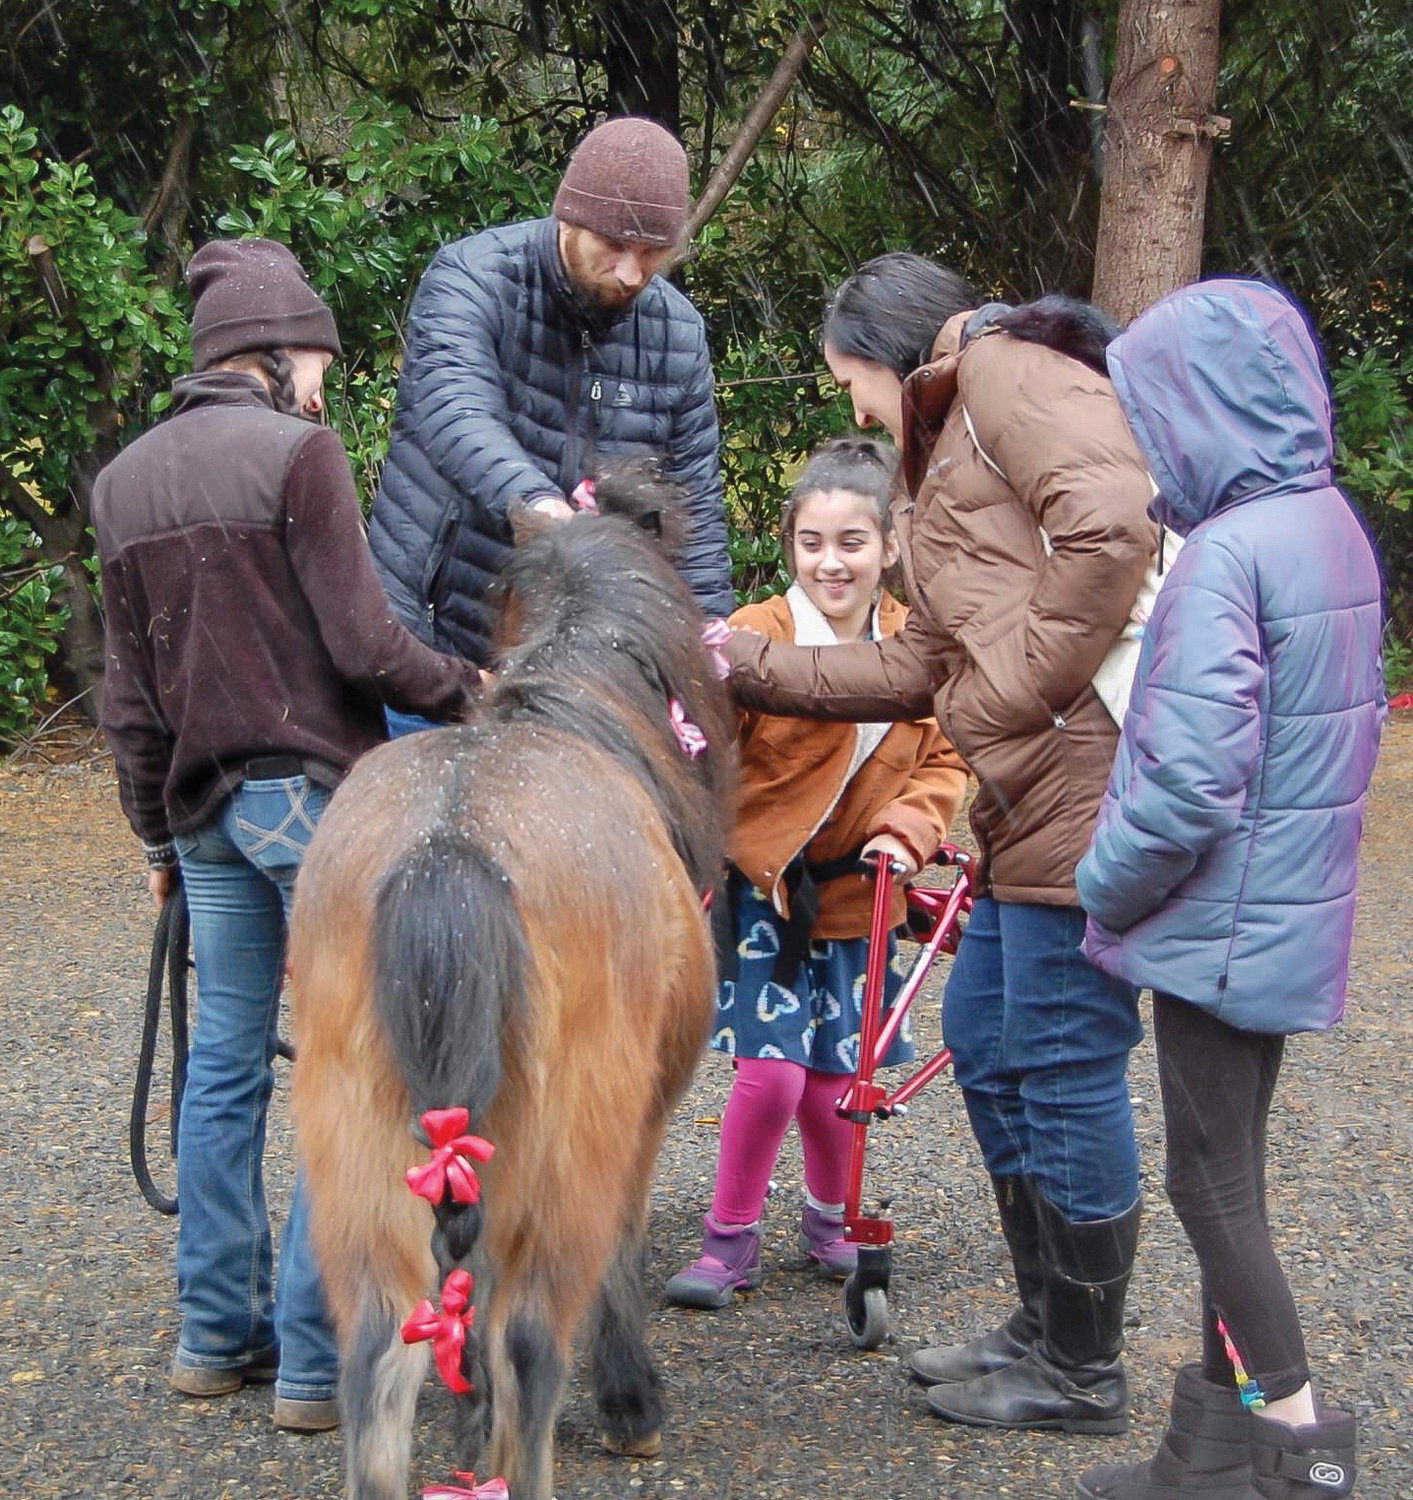 TEAM High School teacher Elizabeth Vallaire and daughter Harper pet a horse at Healing Steps where Harper receives occupational therapy.